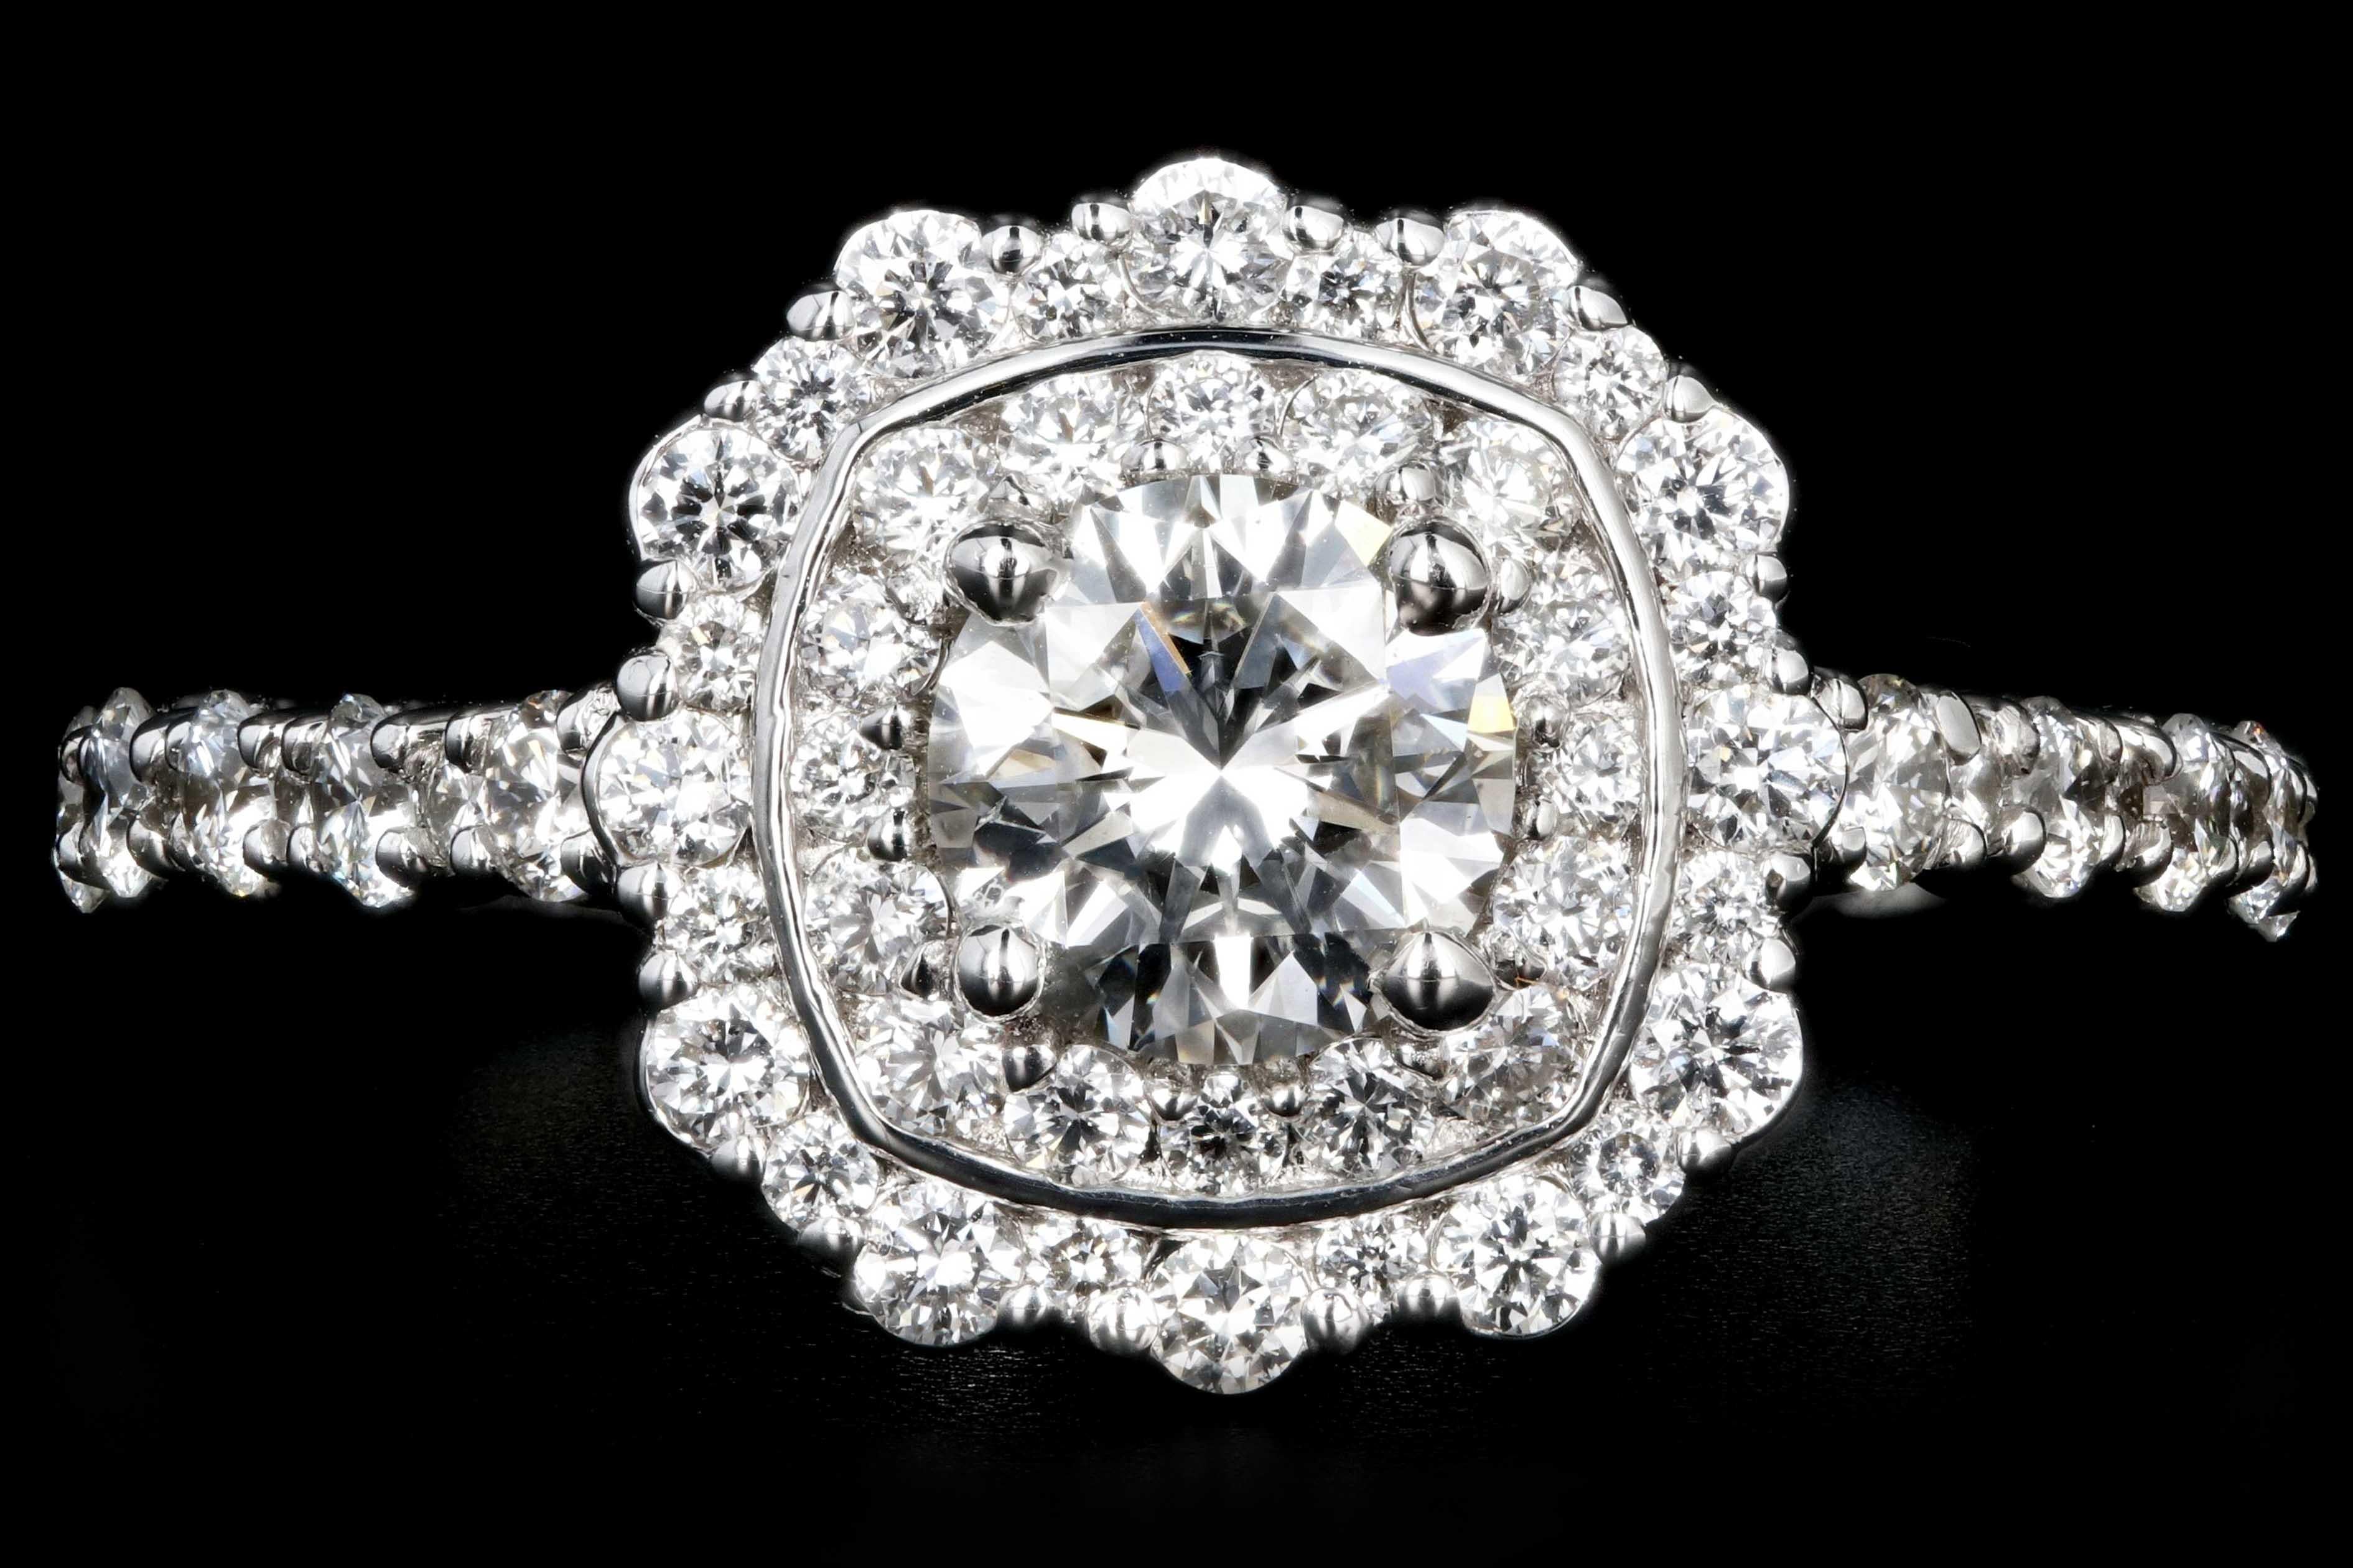 Era: New

Hallmarks: 18K

Composition: 18K White Gold

Primary Stone: Round Brilliant Cut diamond

Carat Weight: .59 Carats

Color/ Clarity: G / VS2

Accent Stone: Round Brilliant Cut Diamonds

Carat Weight: .71 Carats

Color/ Clarity: G-H/